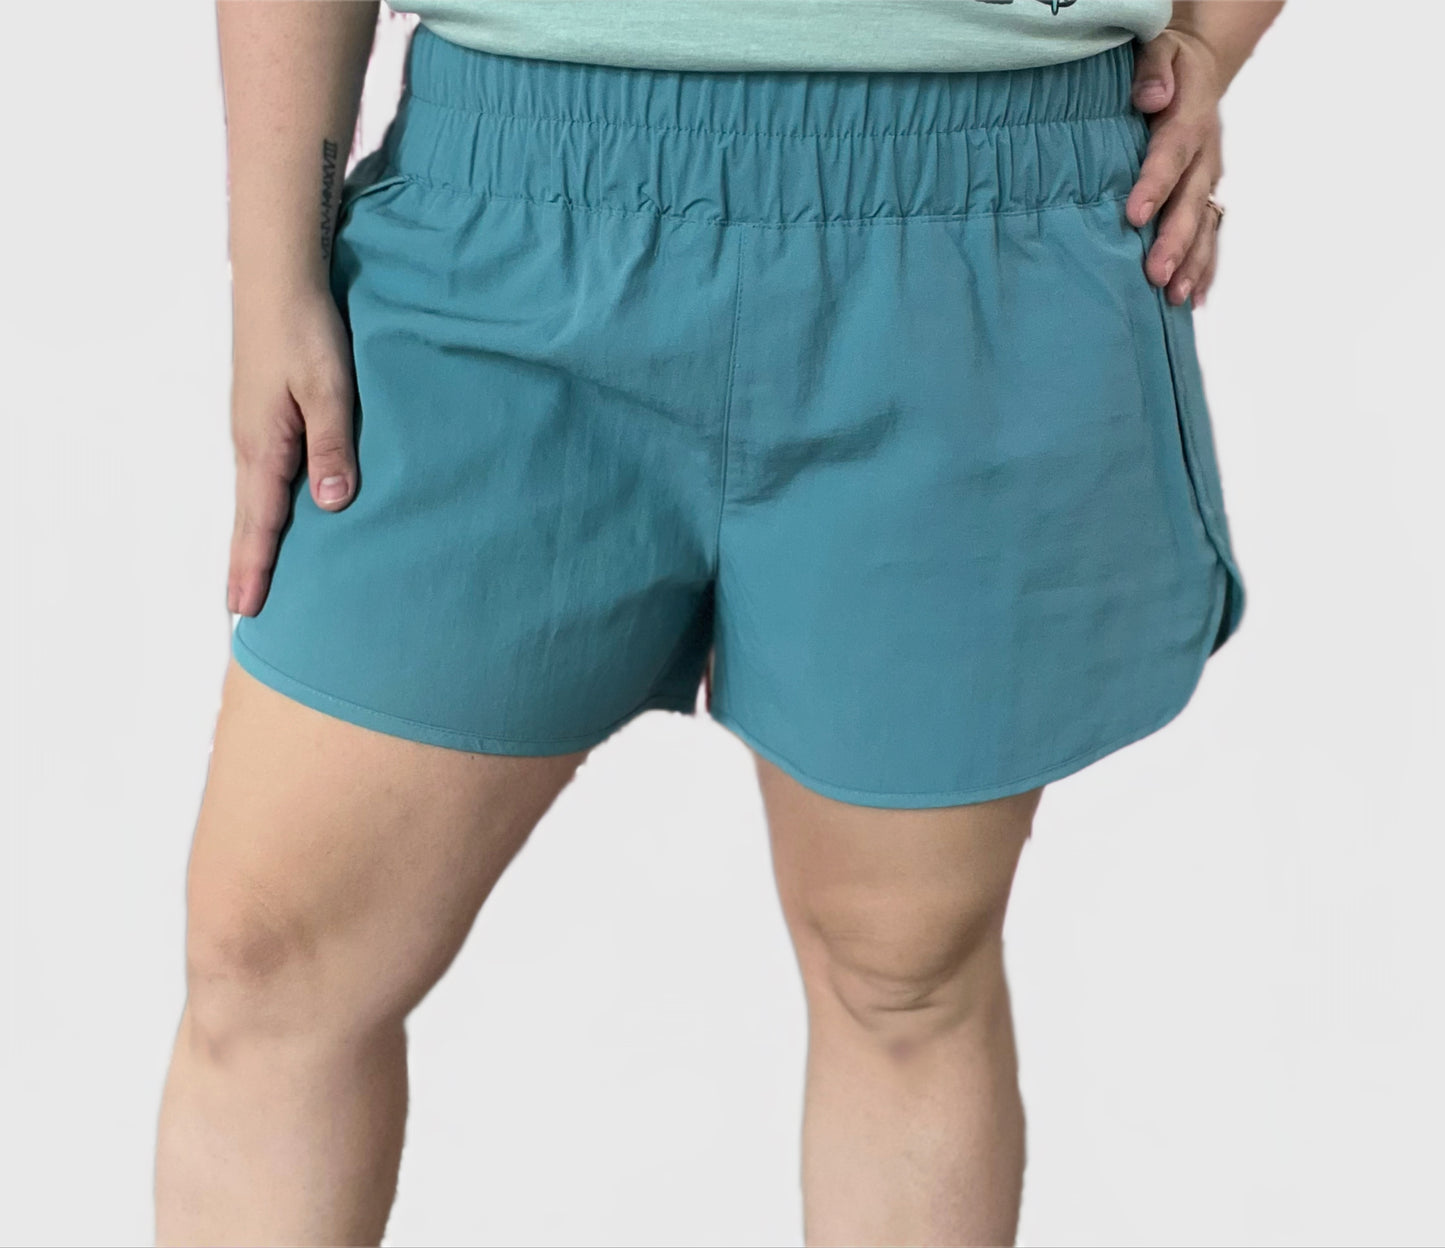 Kelly Shorts in Teal